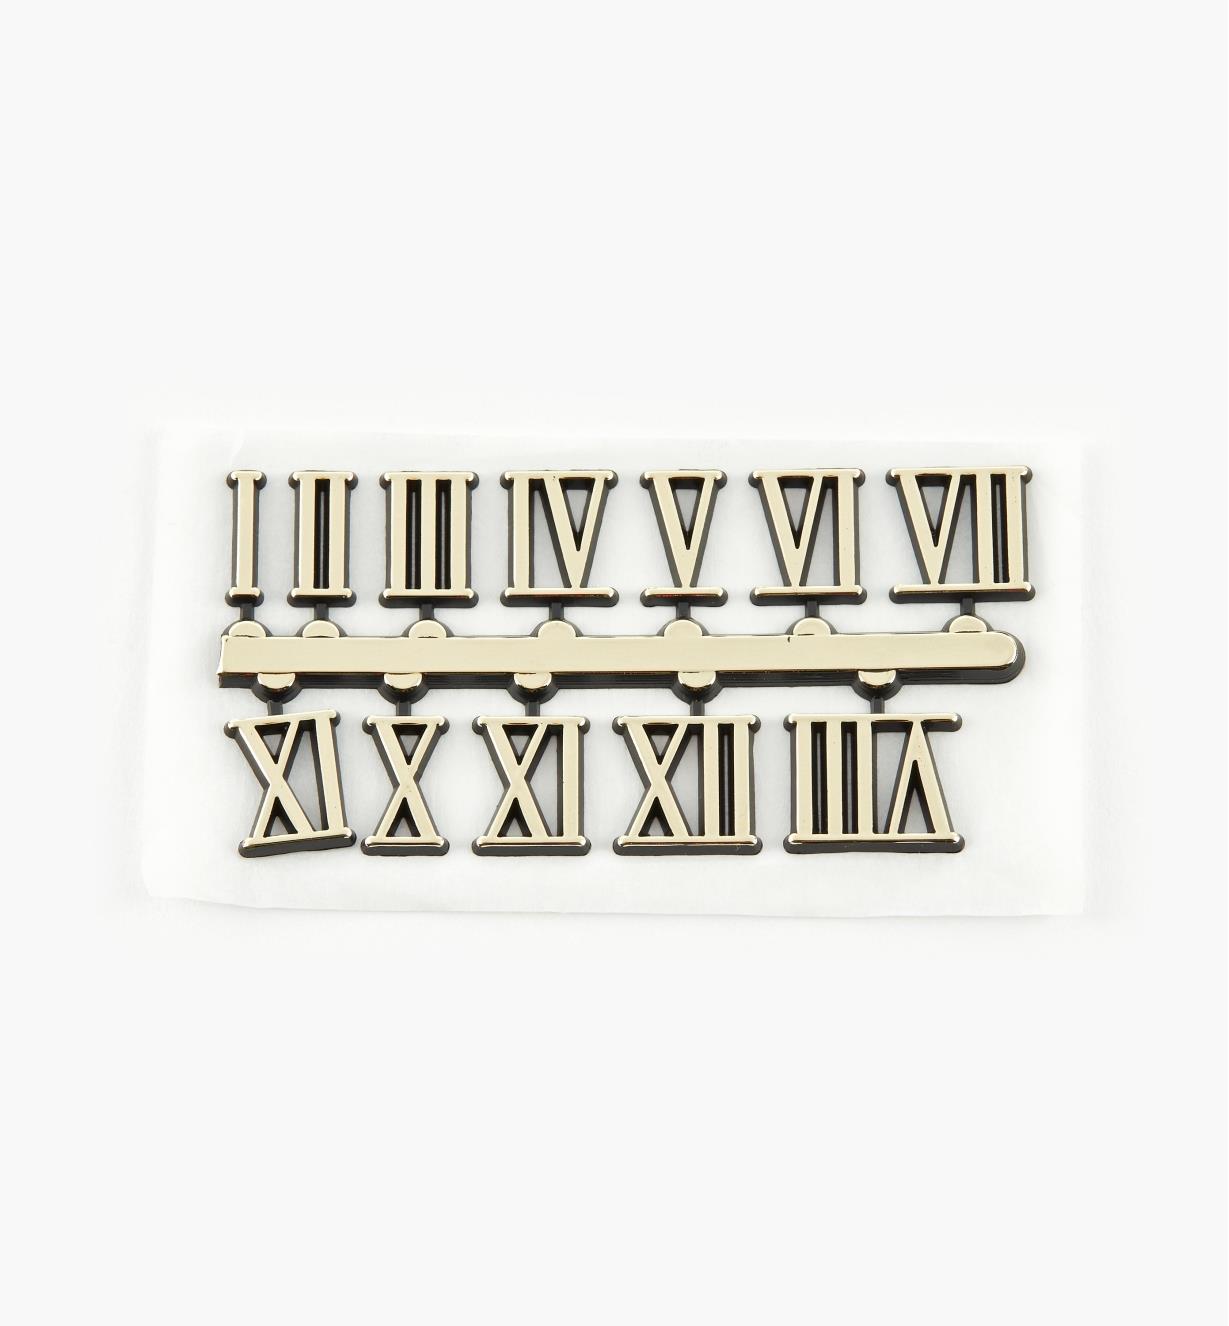 46K5702 - 5/8" Roman Adhesive-Backed Numerals, set of 12